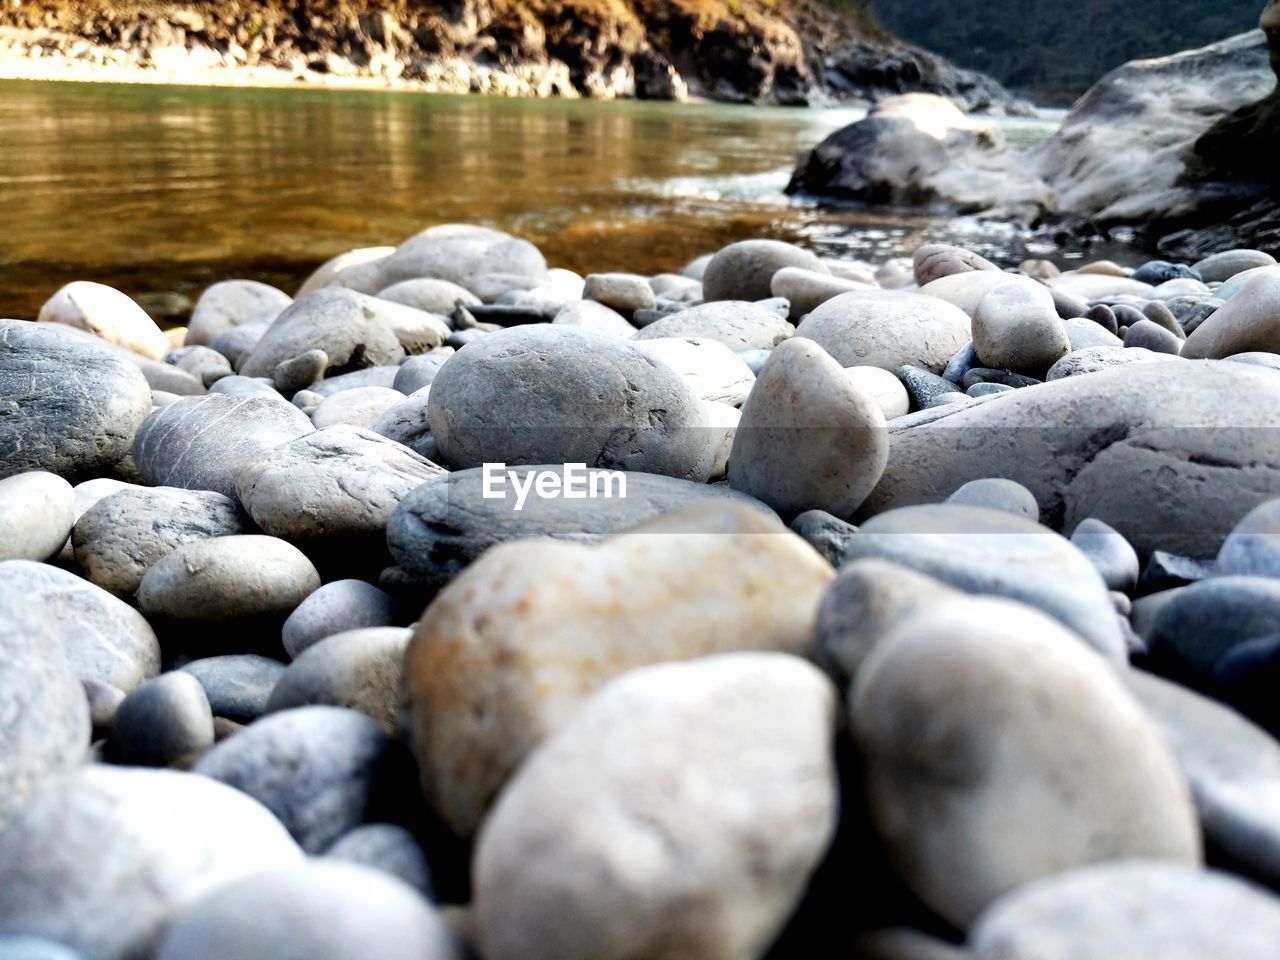 SURFACE LEVEL OF PEBBLES ON SHORE